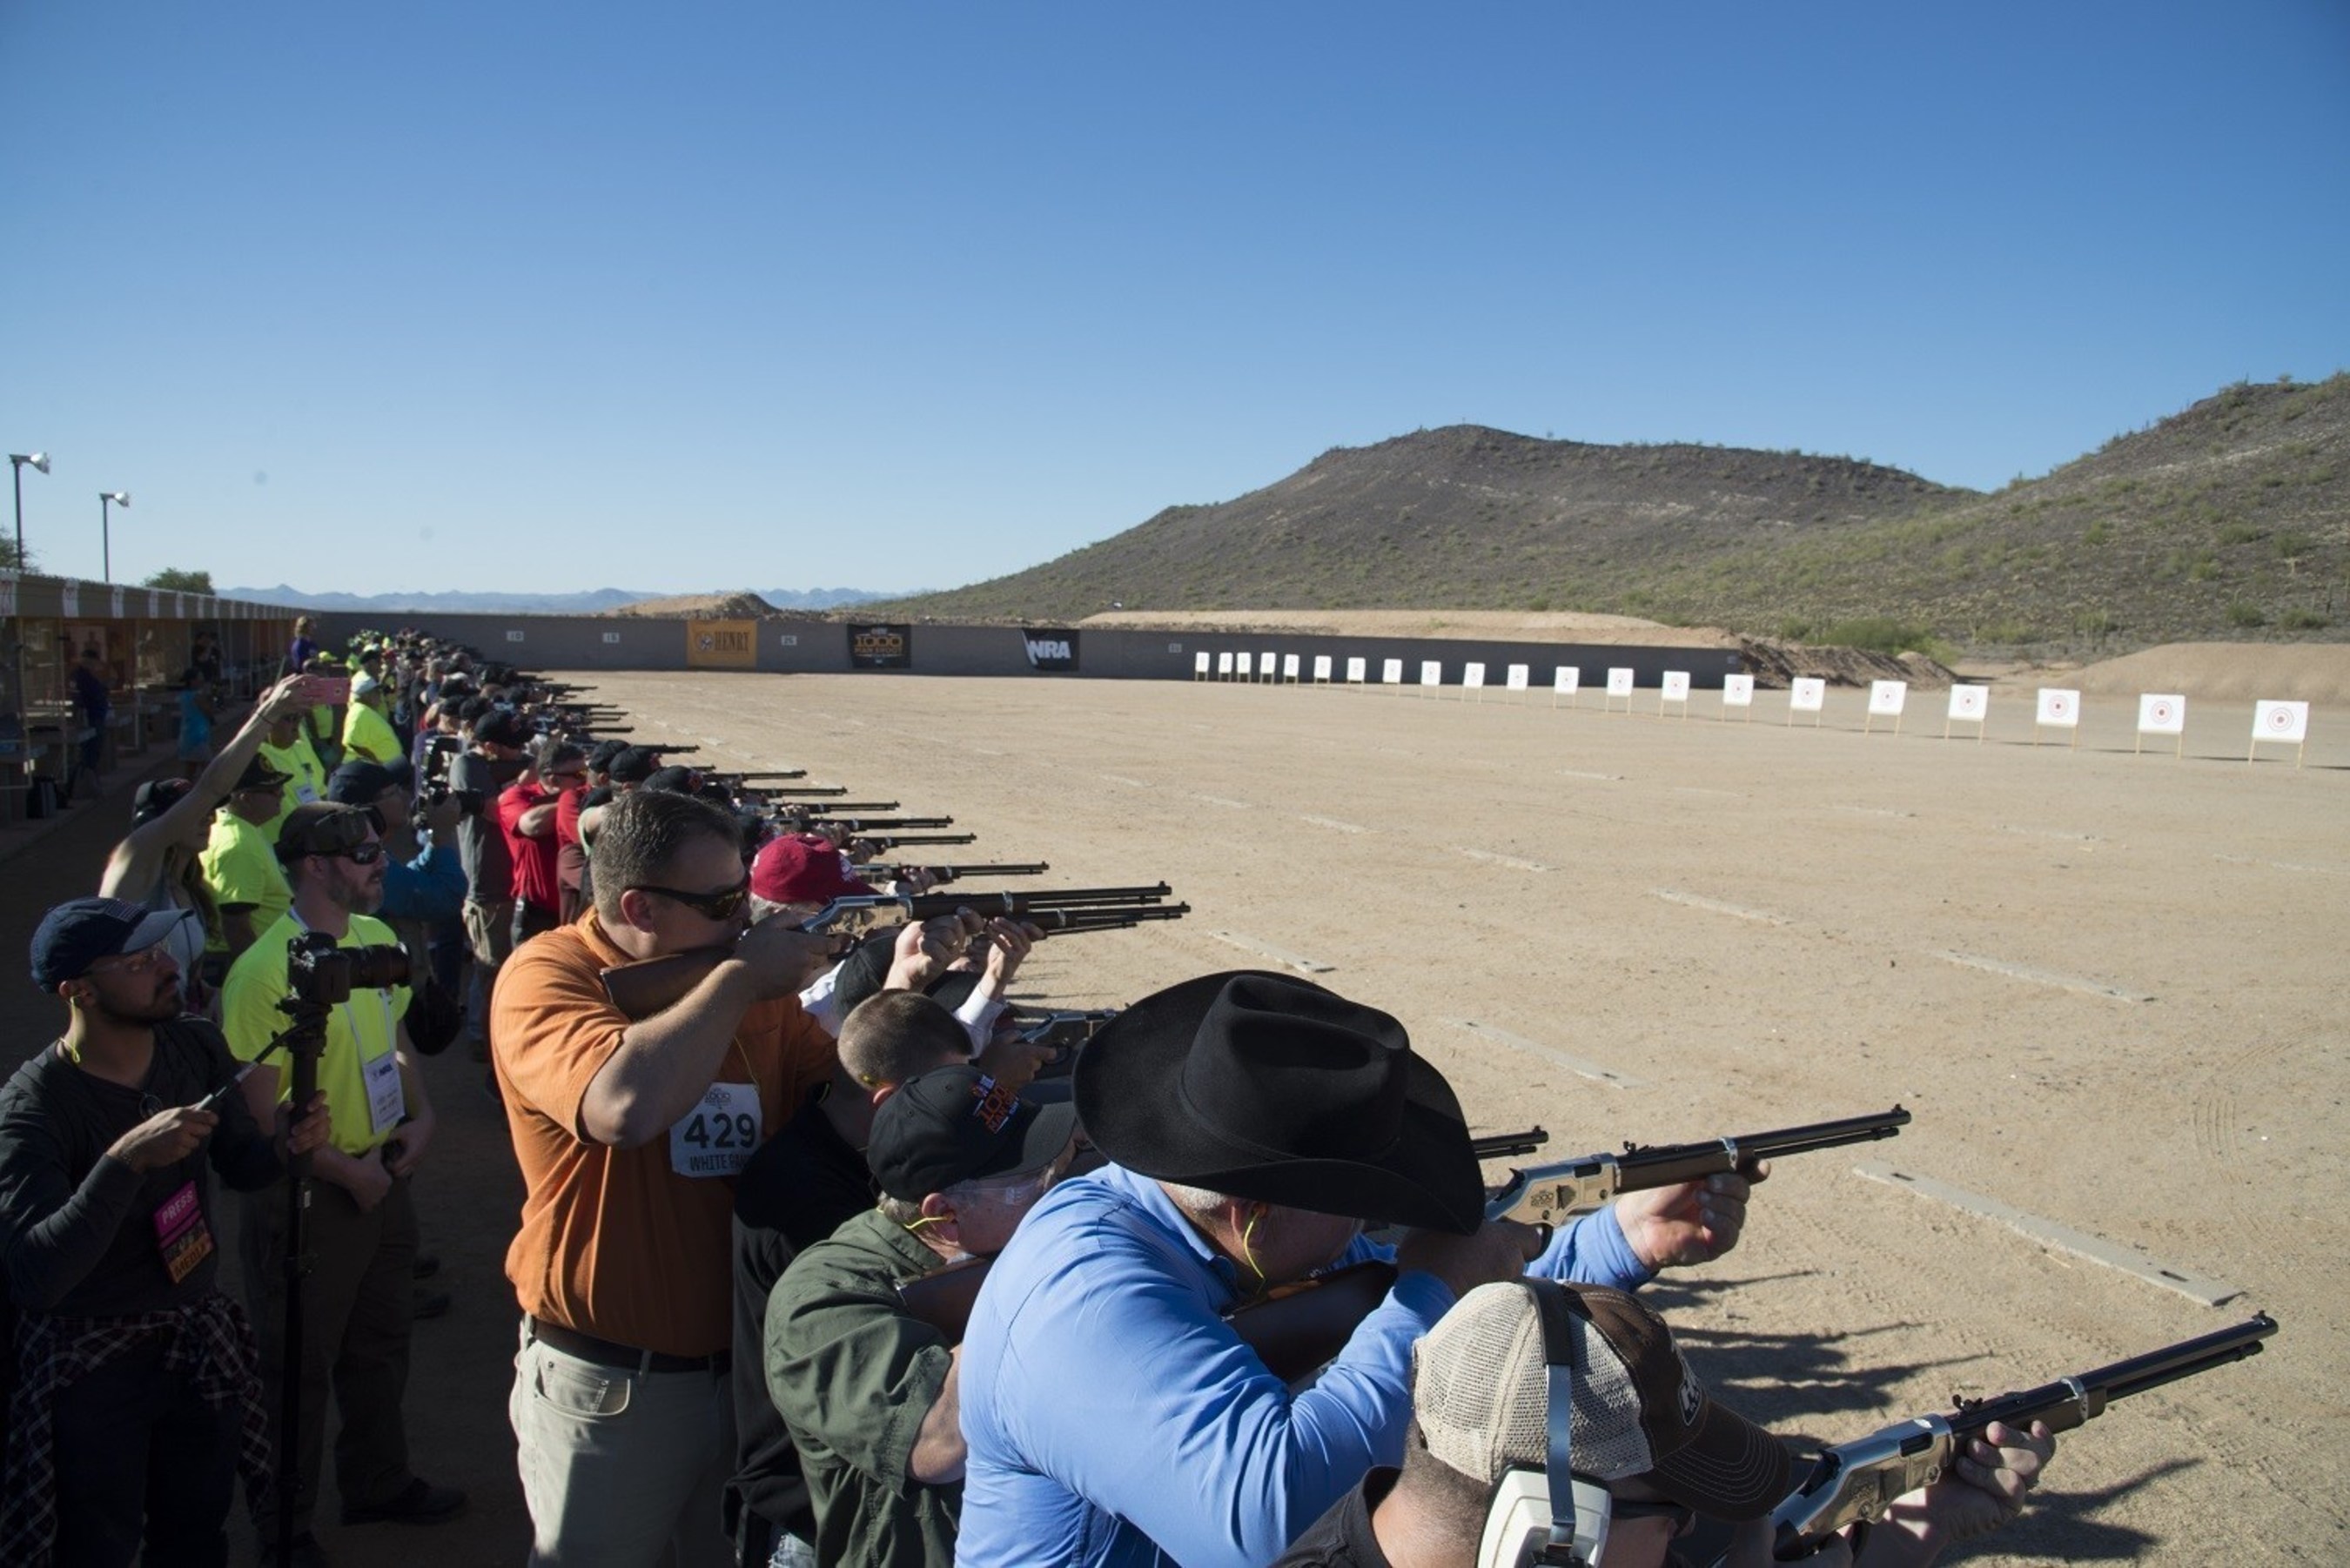 A view from the firing line at the Henry 1000 Man Shoot held at the Ben Avery Shooting Facility in Phoenix, Arizona on Monday, November 14, 2016 where 1000 proud Americans simultaneously fired two shots from a commemorative Henry Golden Boy Silver 1000 Man Edition .22 caliber rifle under the close supervision of the NRA.